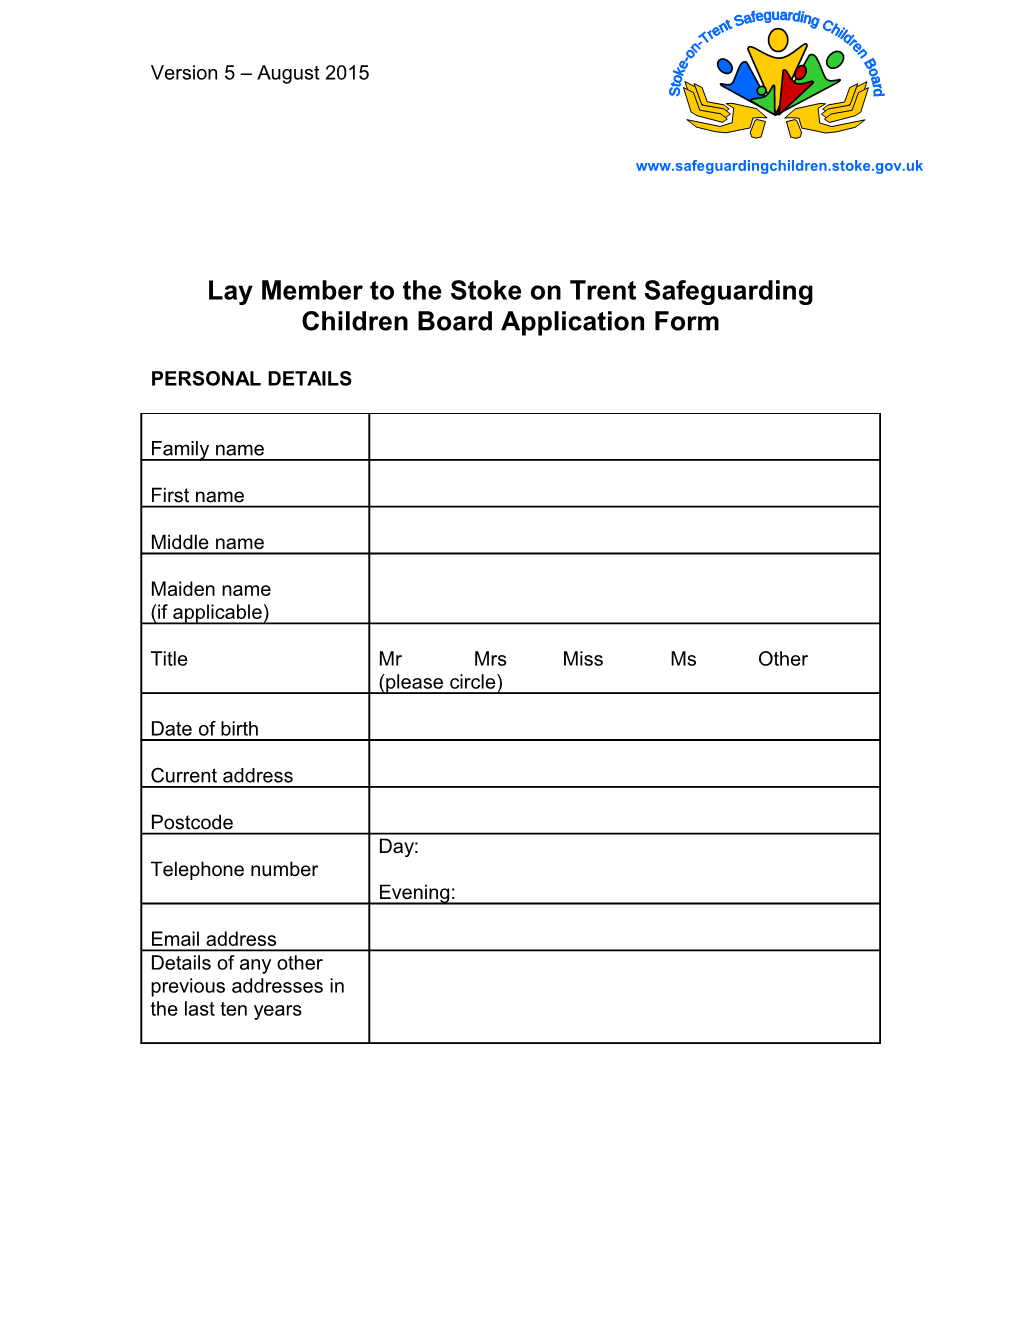 Lay Adviser to the Stoke on Trent Safeguarding Children Board Application Form